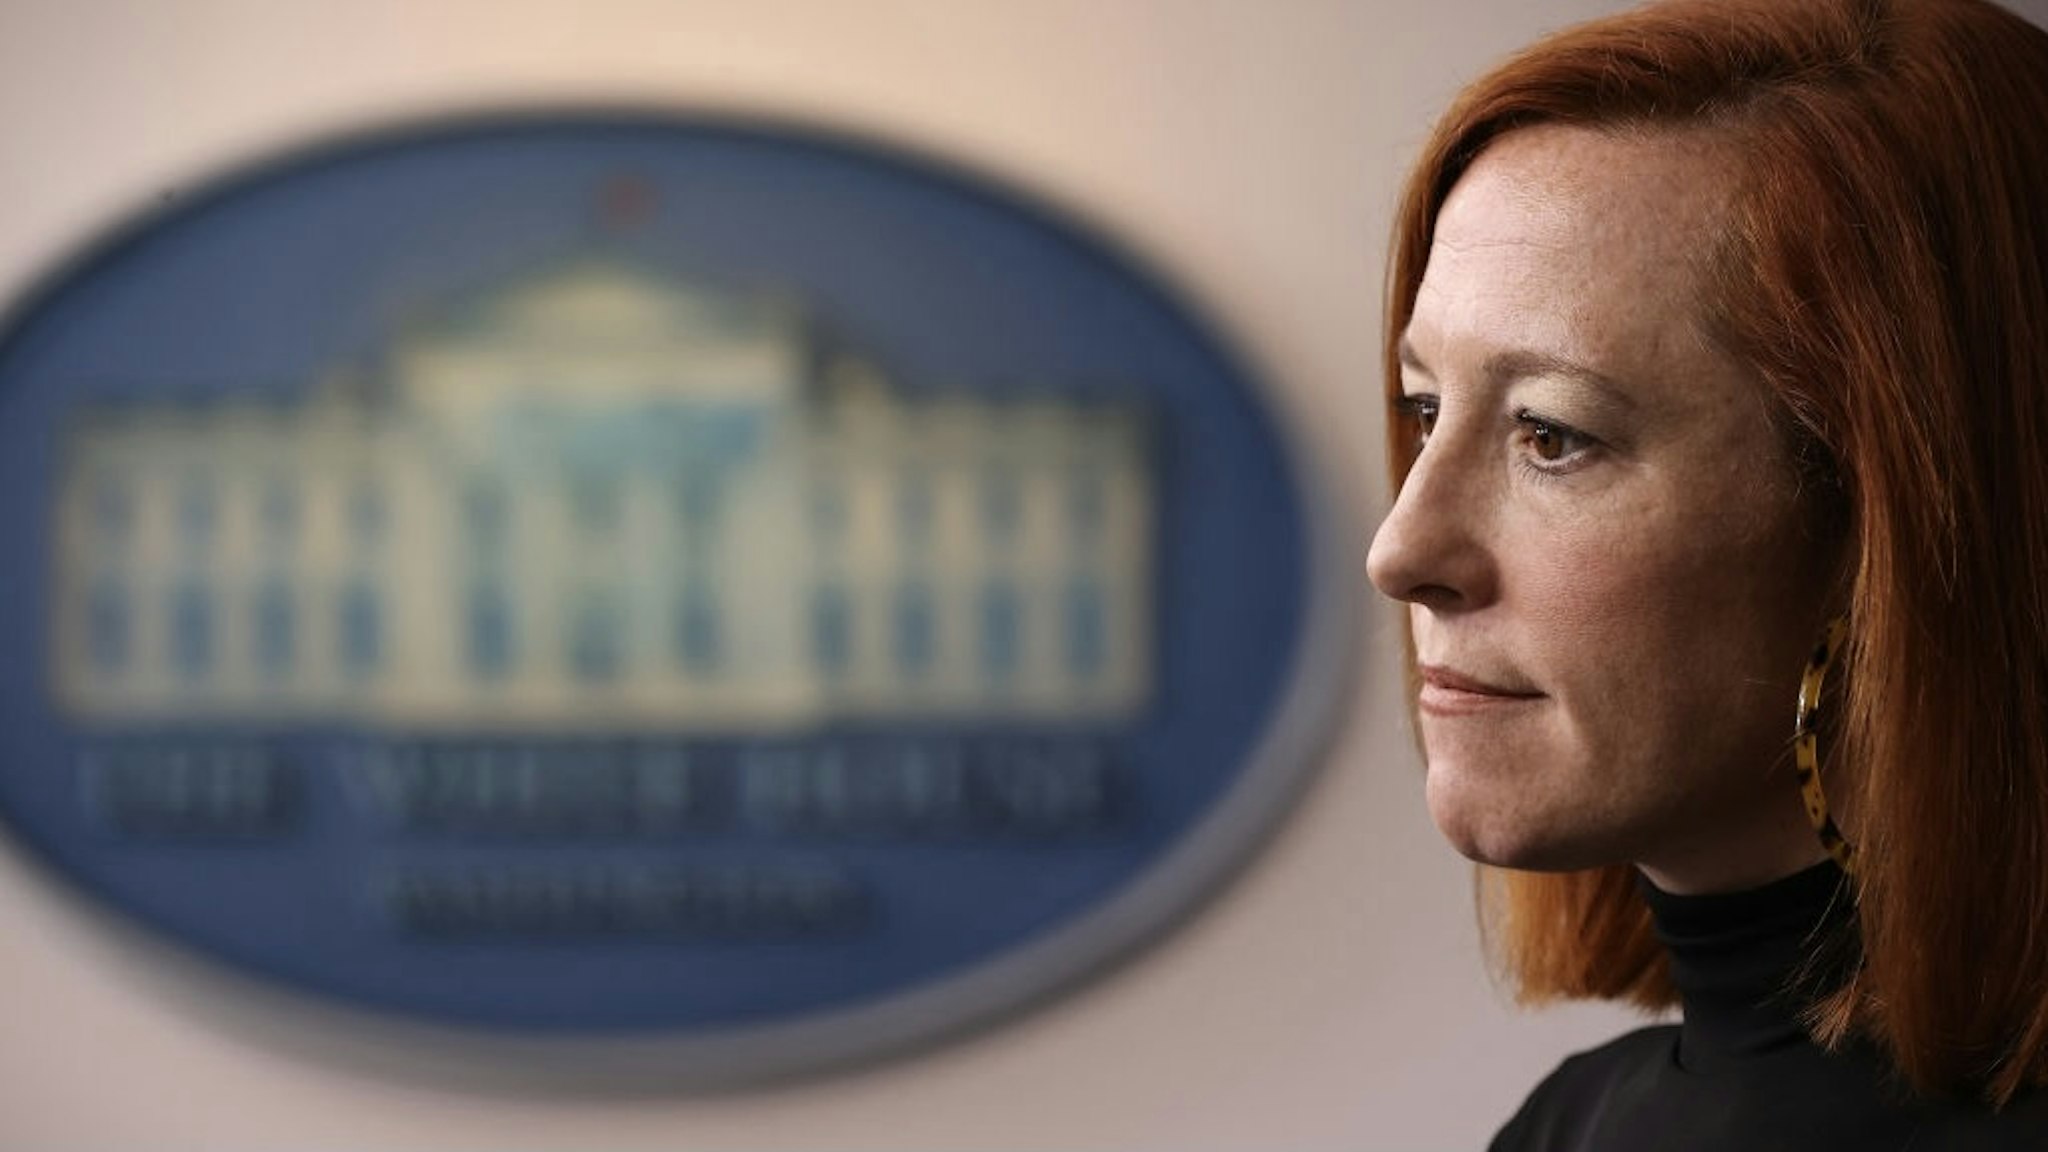 WASHINGTON, DC - FEBRUARY 03: White House Press Secretary Jen Psaki talks to reporters during a news conference in the Brady Press Briefing Room at the White House on February 03, 2021 in Washington, DC. After appearing to slight the U.S. Space Force, Psaki invited representatives of the newest military branch to come to the White House to brief reporters. (Photo by Chip Somodevilla/Getty Images)